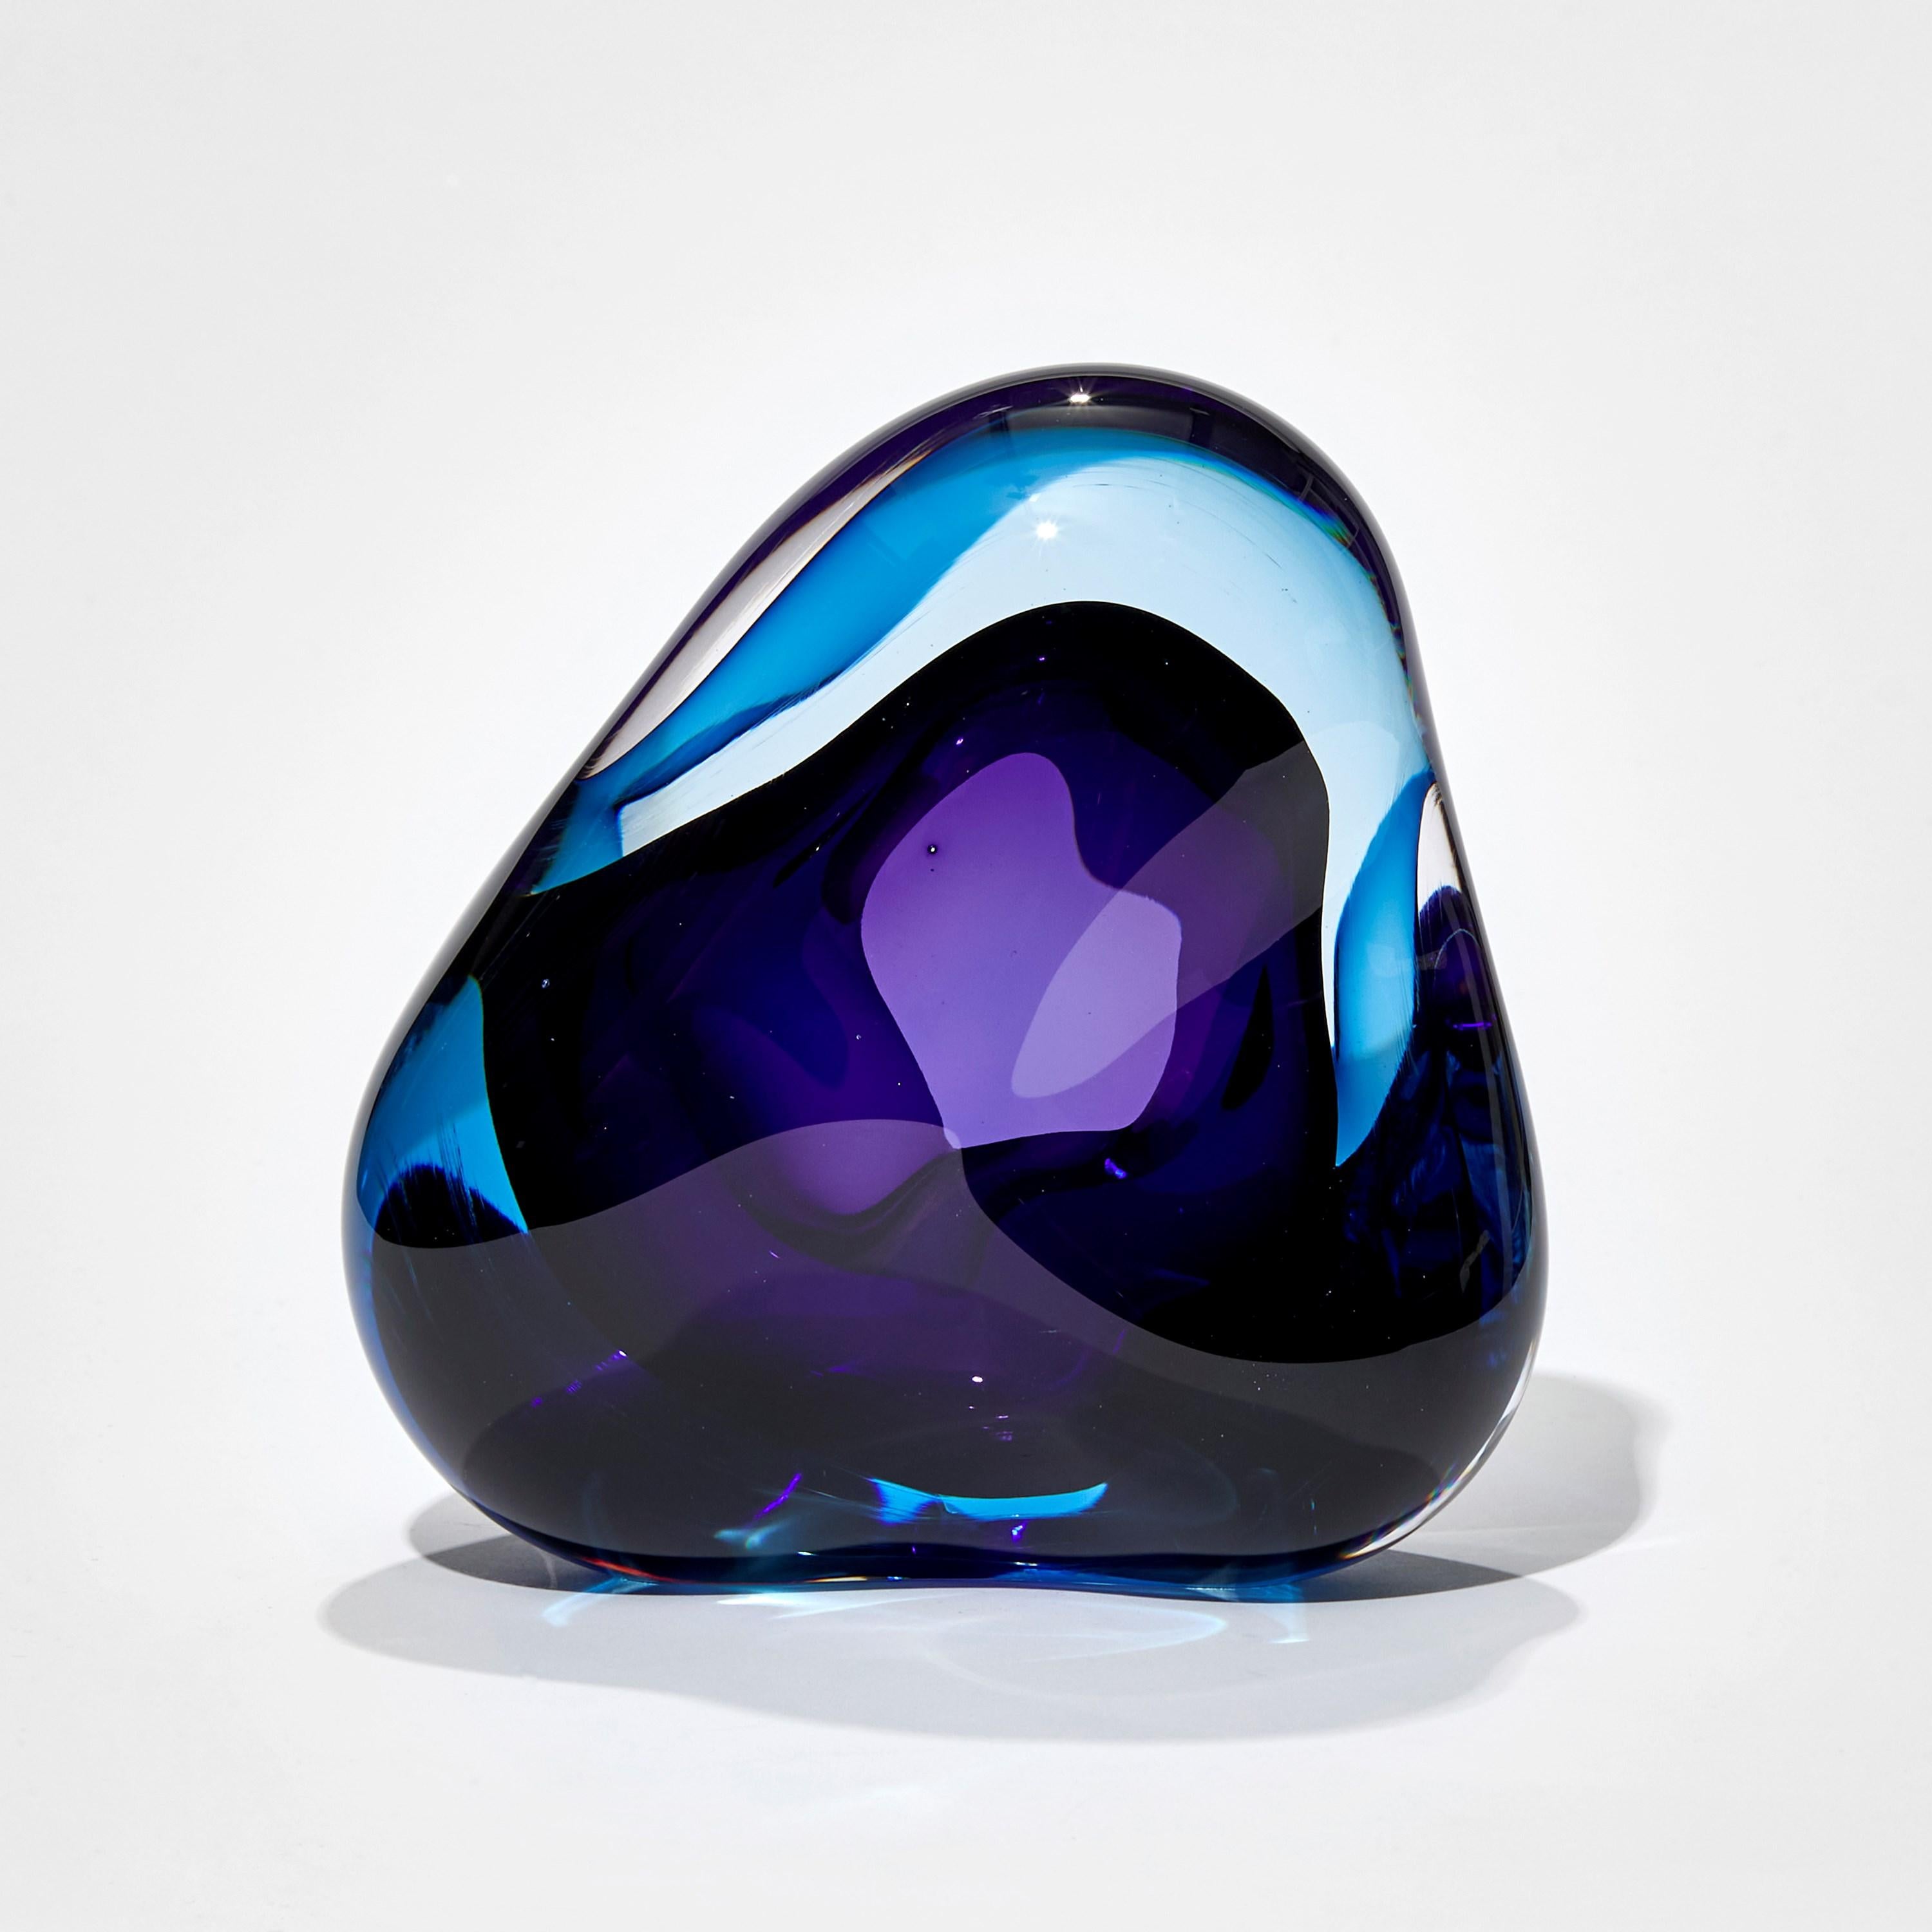 Organic Modern Vug in Turquoise and Purple, Glass Geode Sculpture by Samantha Donaldson For Sale